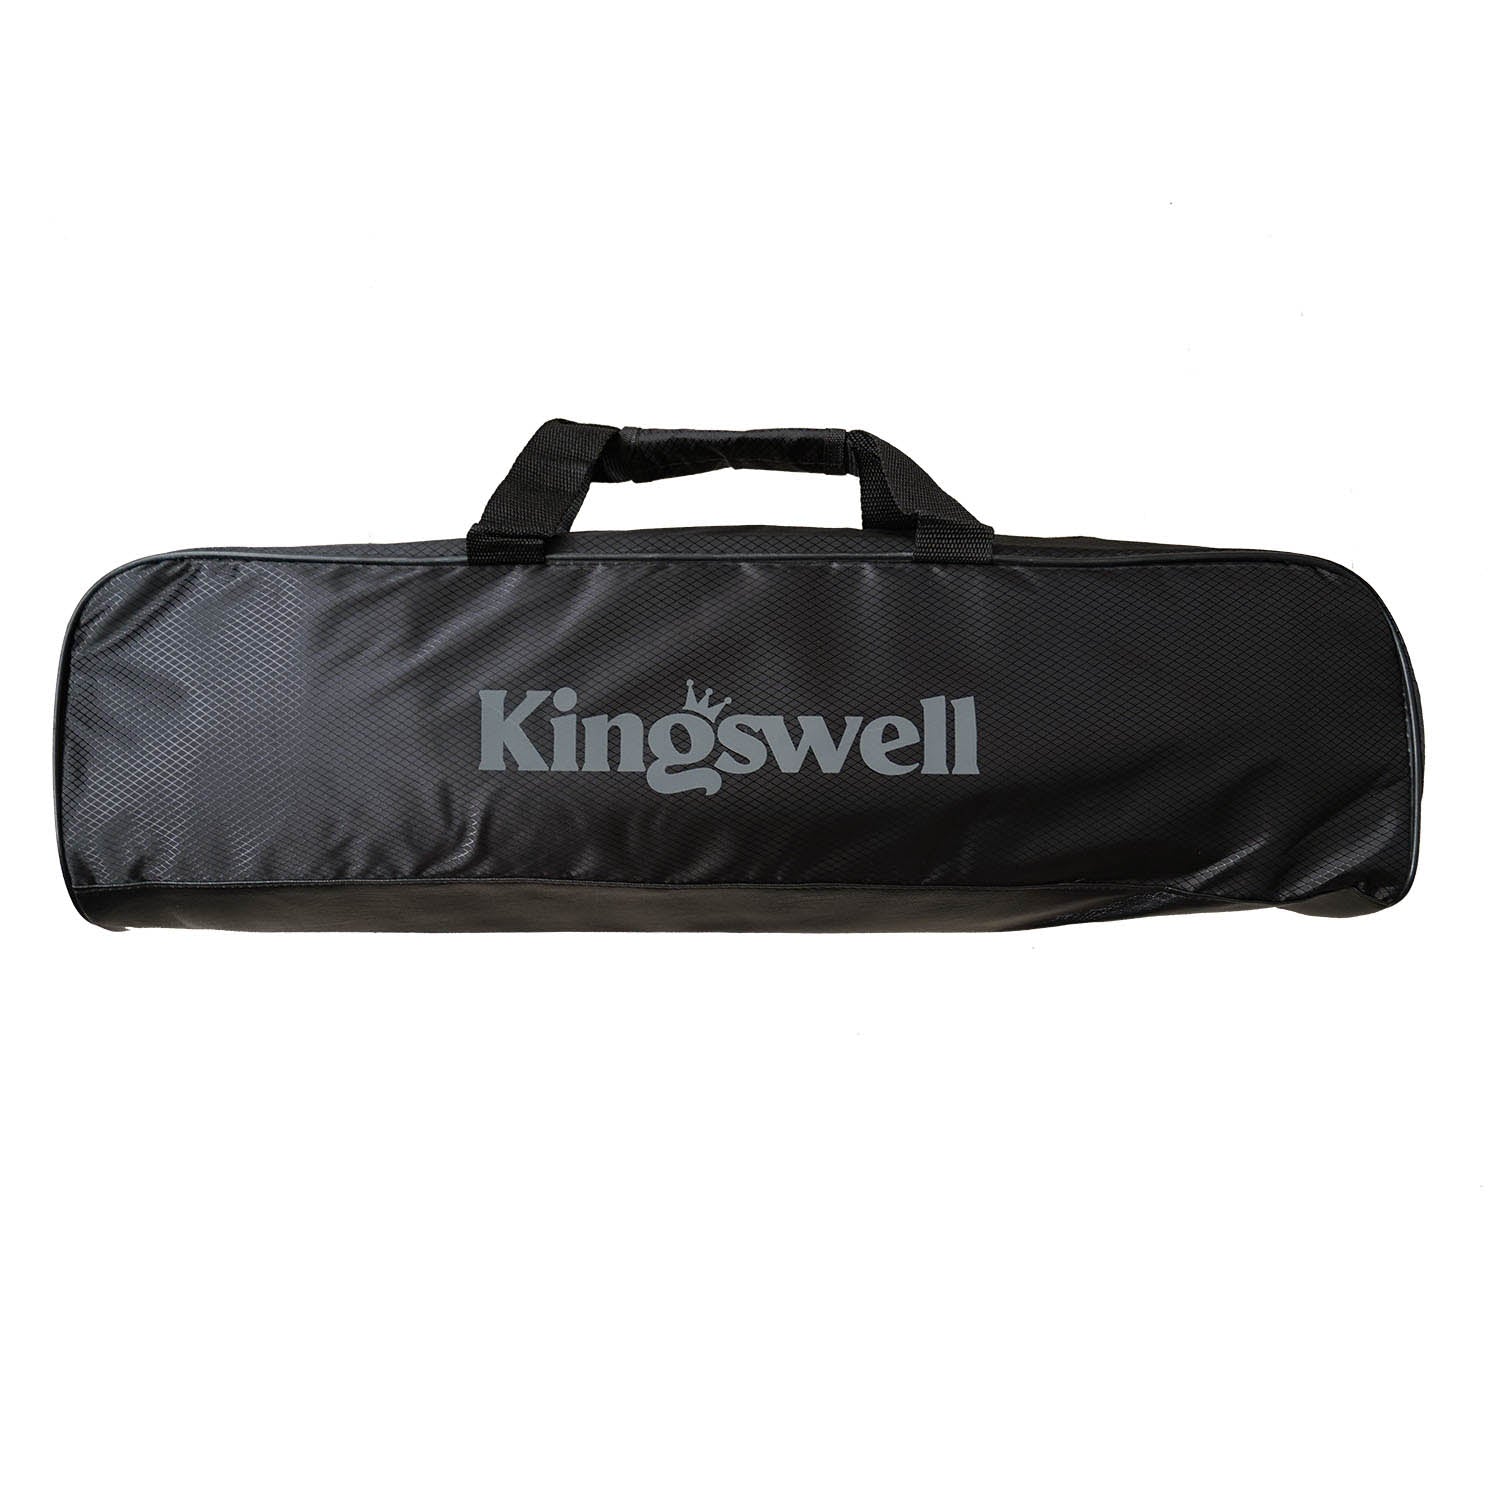 Products - Kingswell